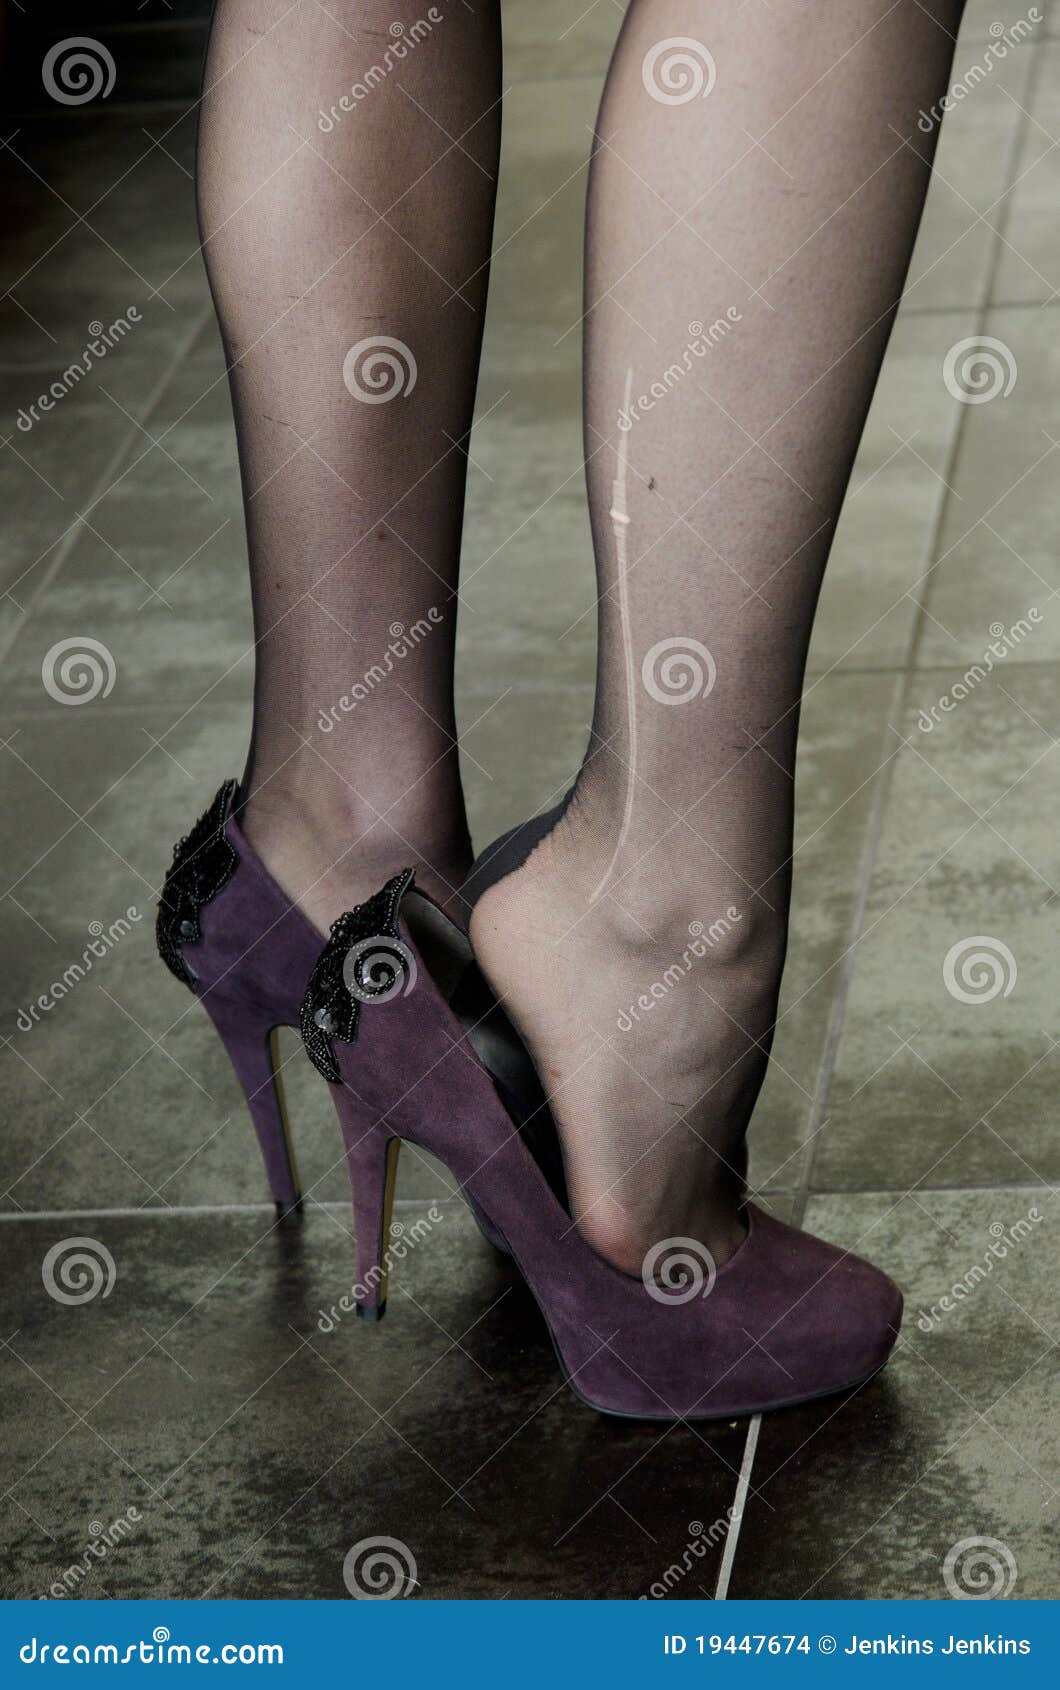 High Heels And Stockings